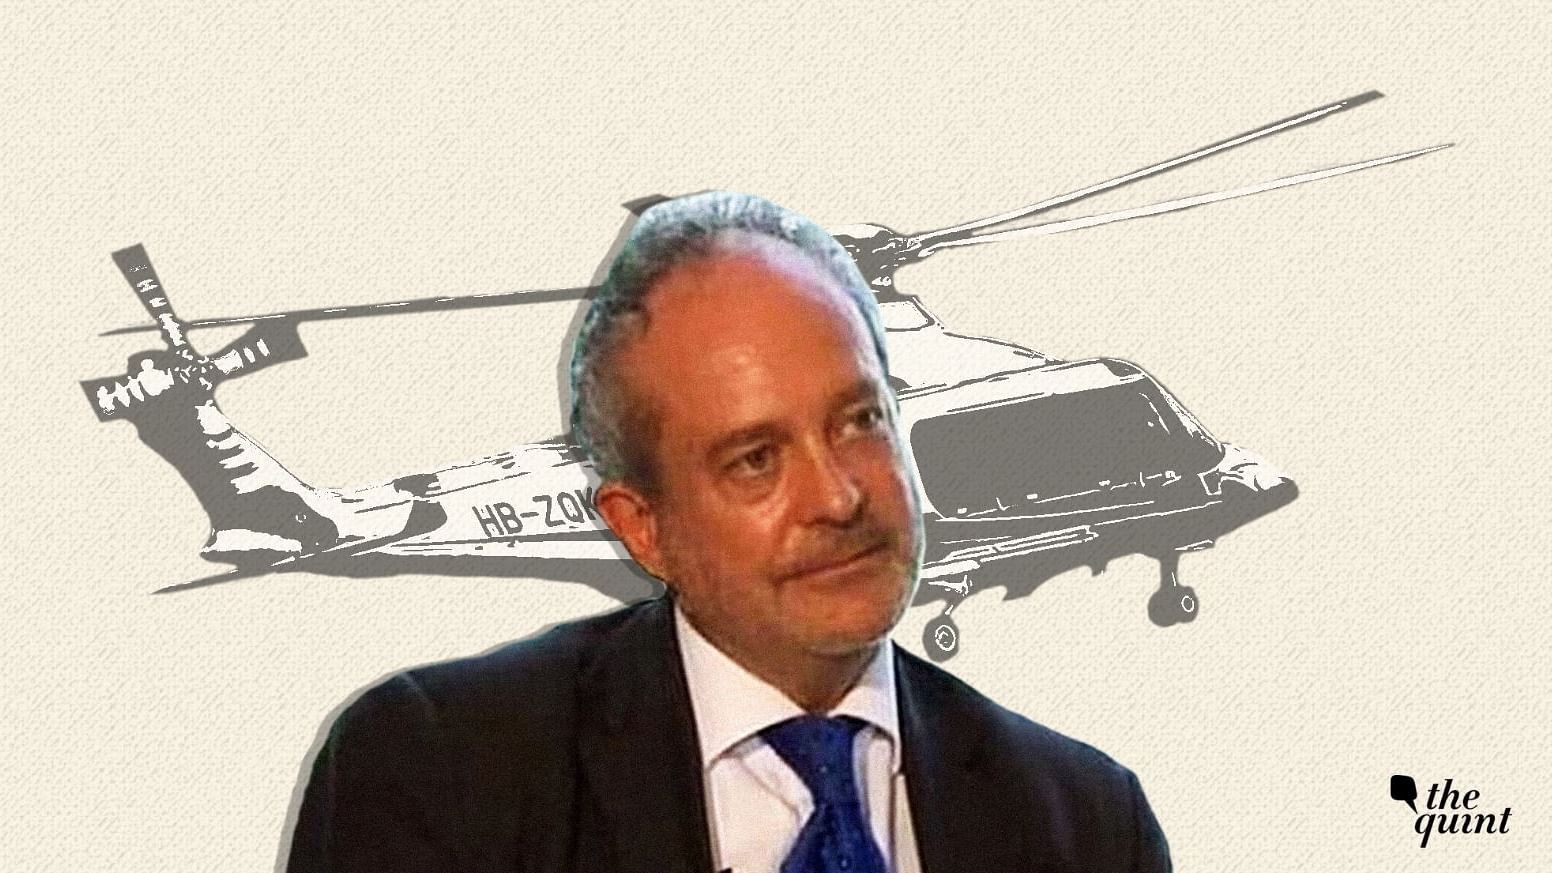 Christian James Michel is the alleged middleman wanted in India in connection with the AgustaWestland VVIP chopper scam.